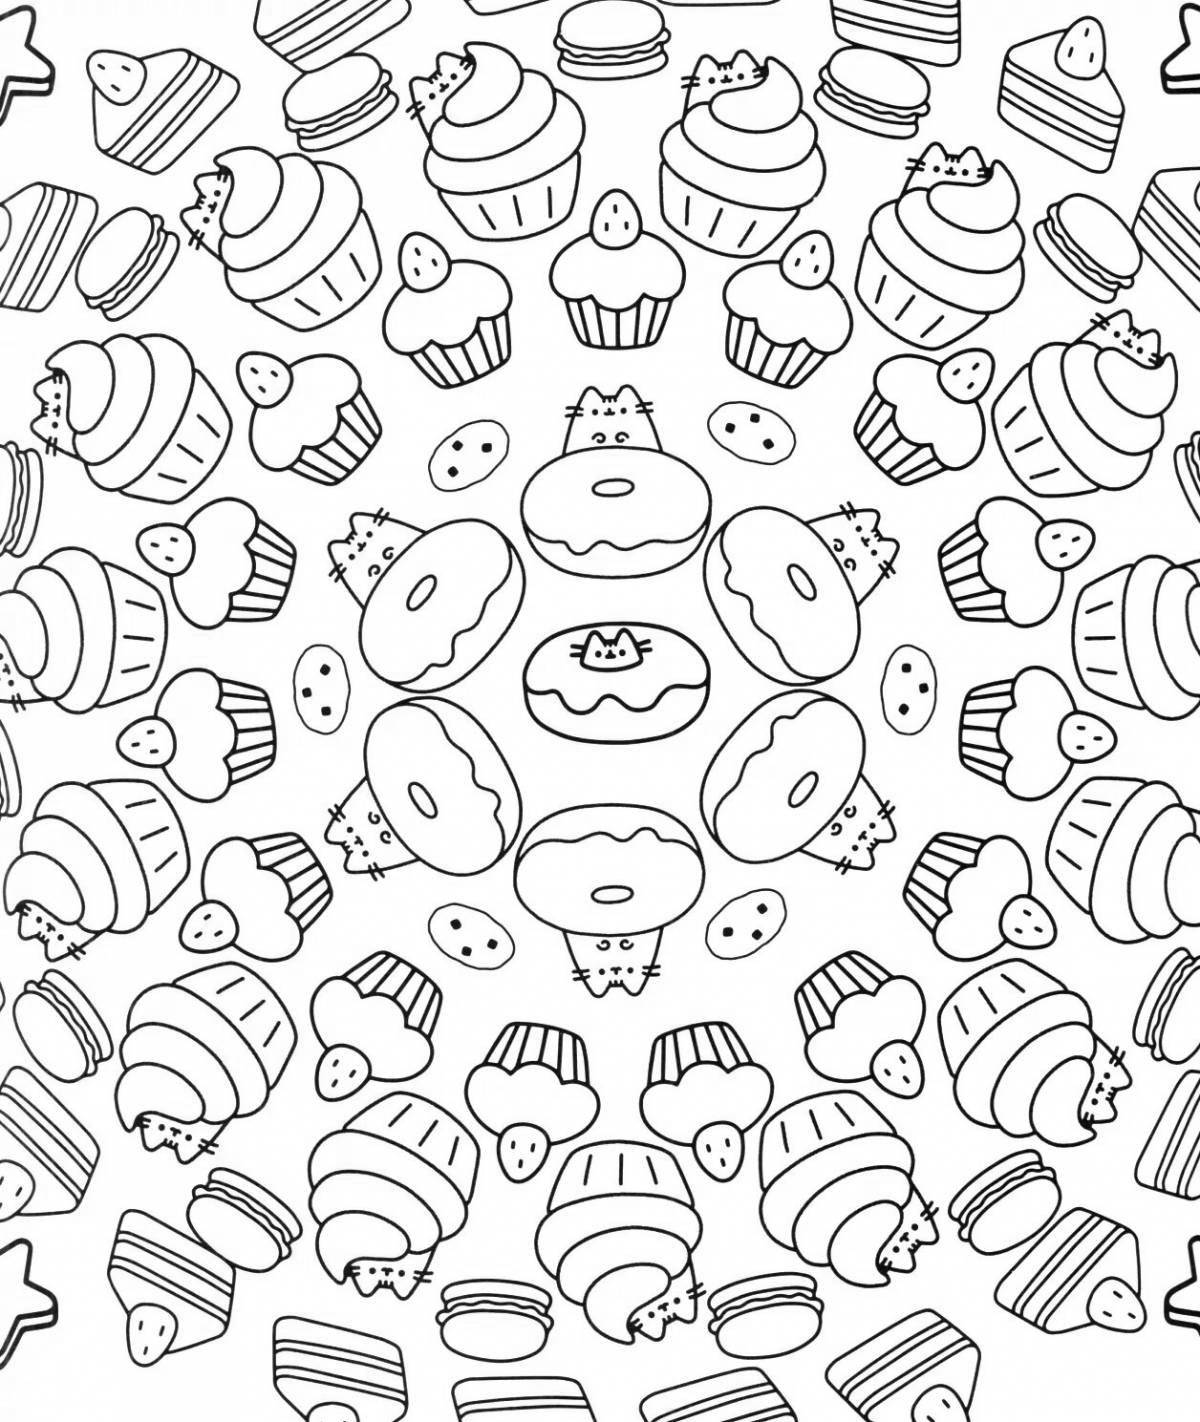 Coloring page playful donut cat